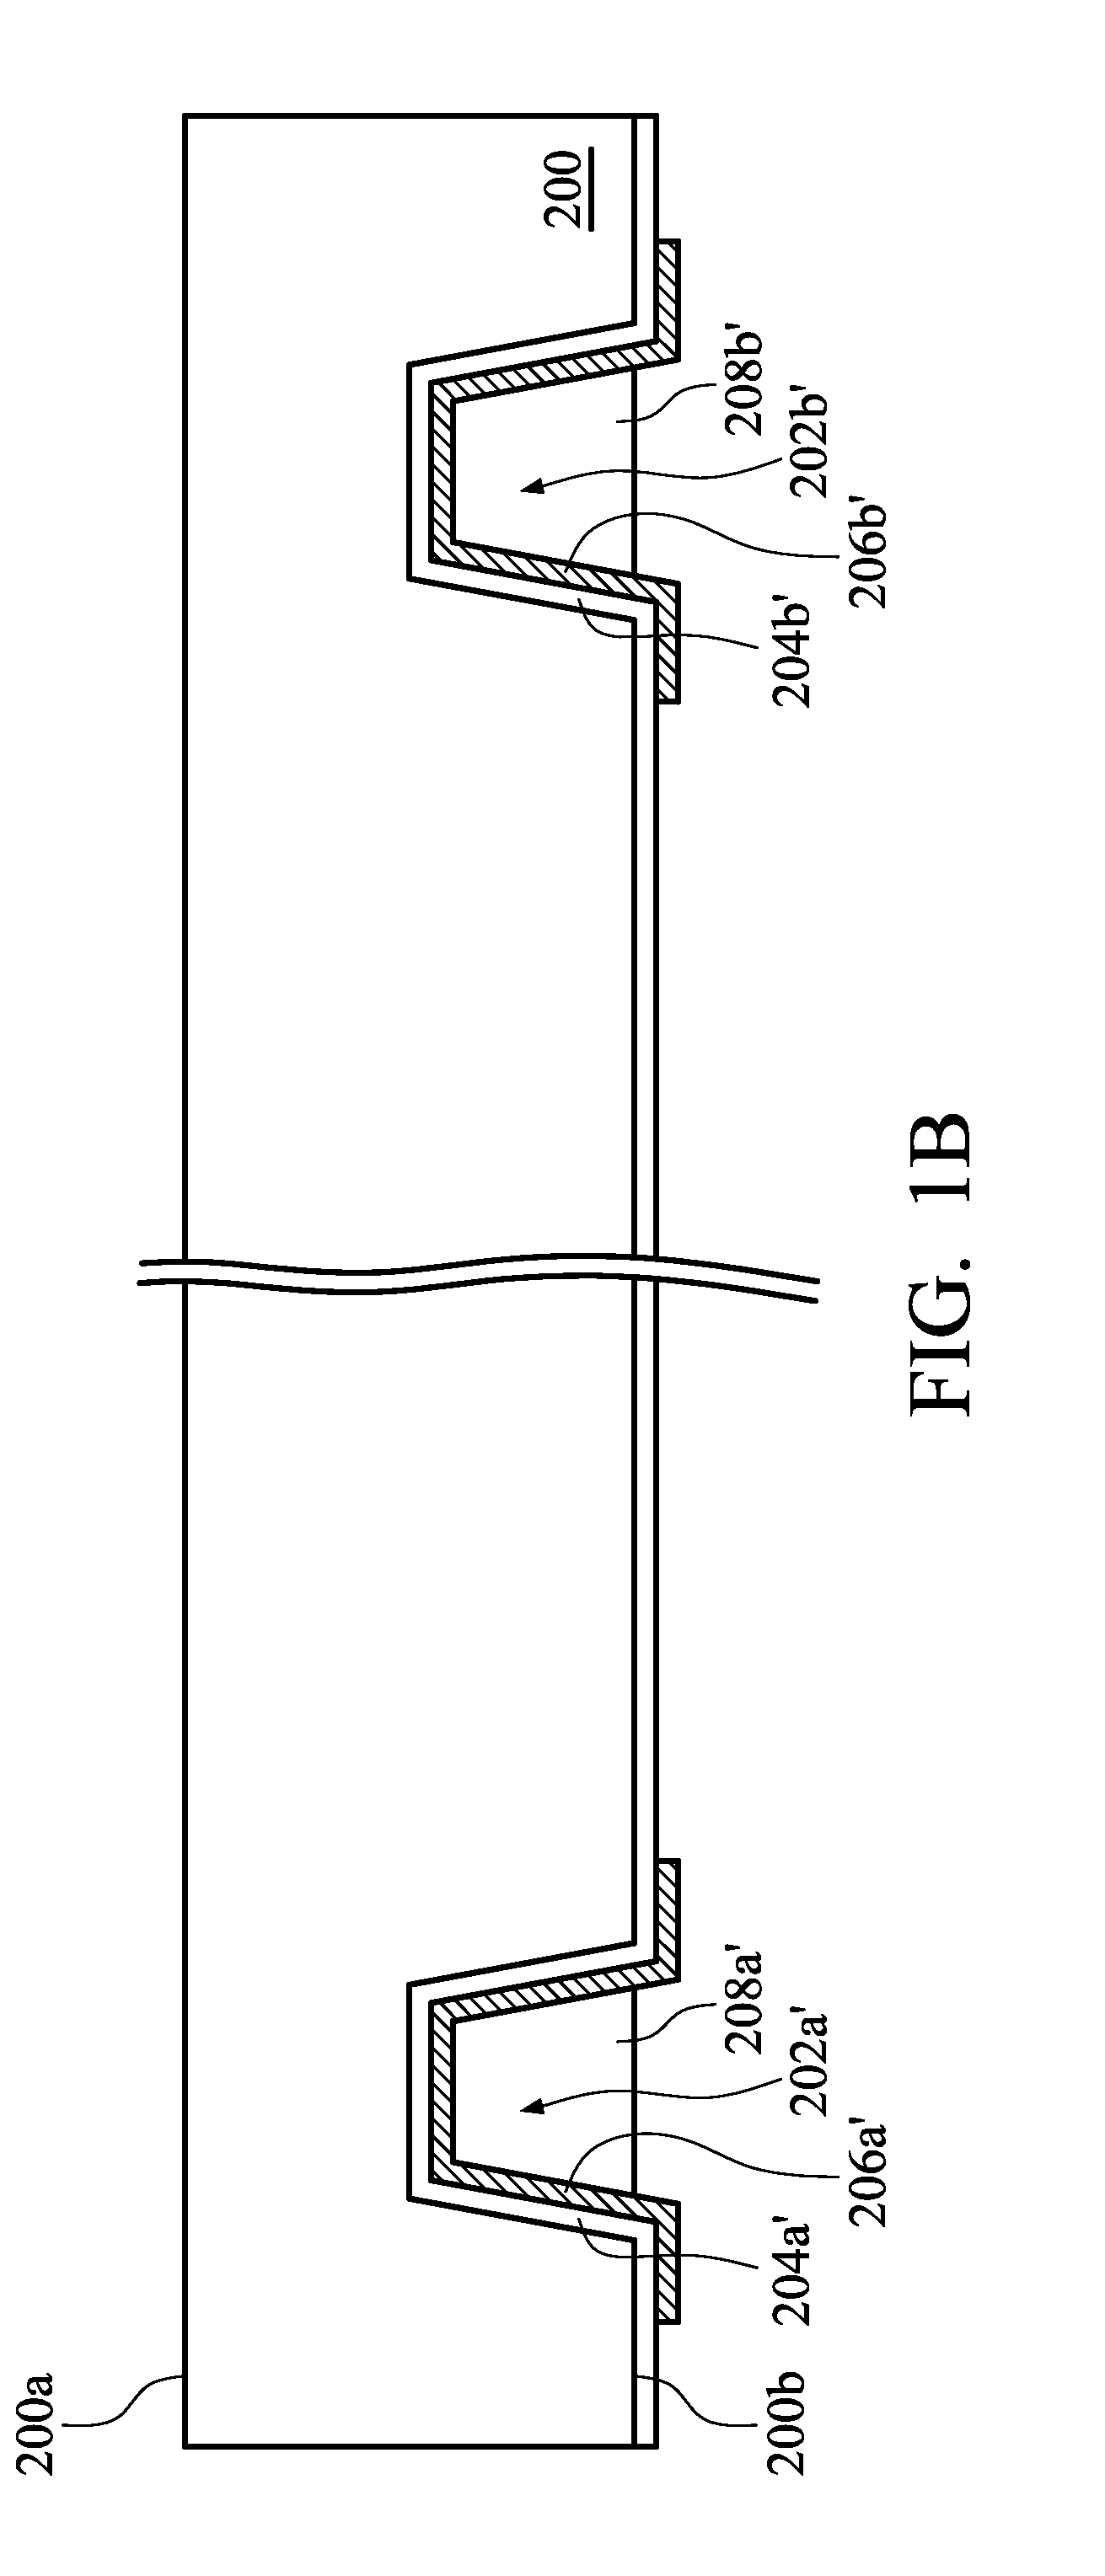 Chip package structure and method for fabricating the same